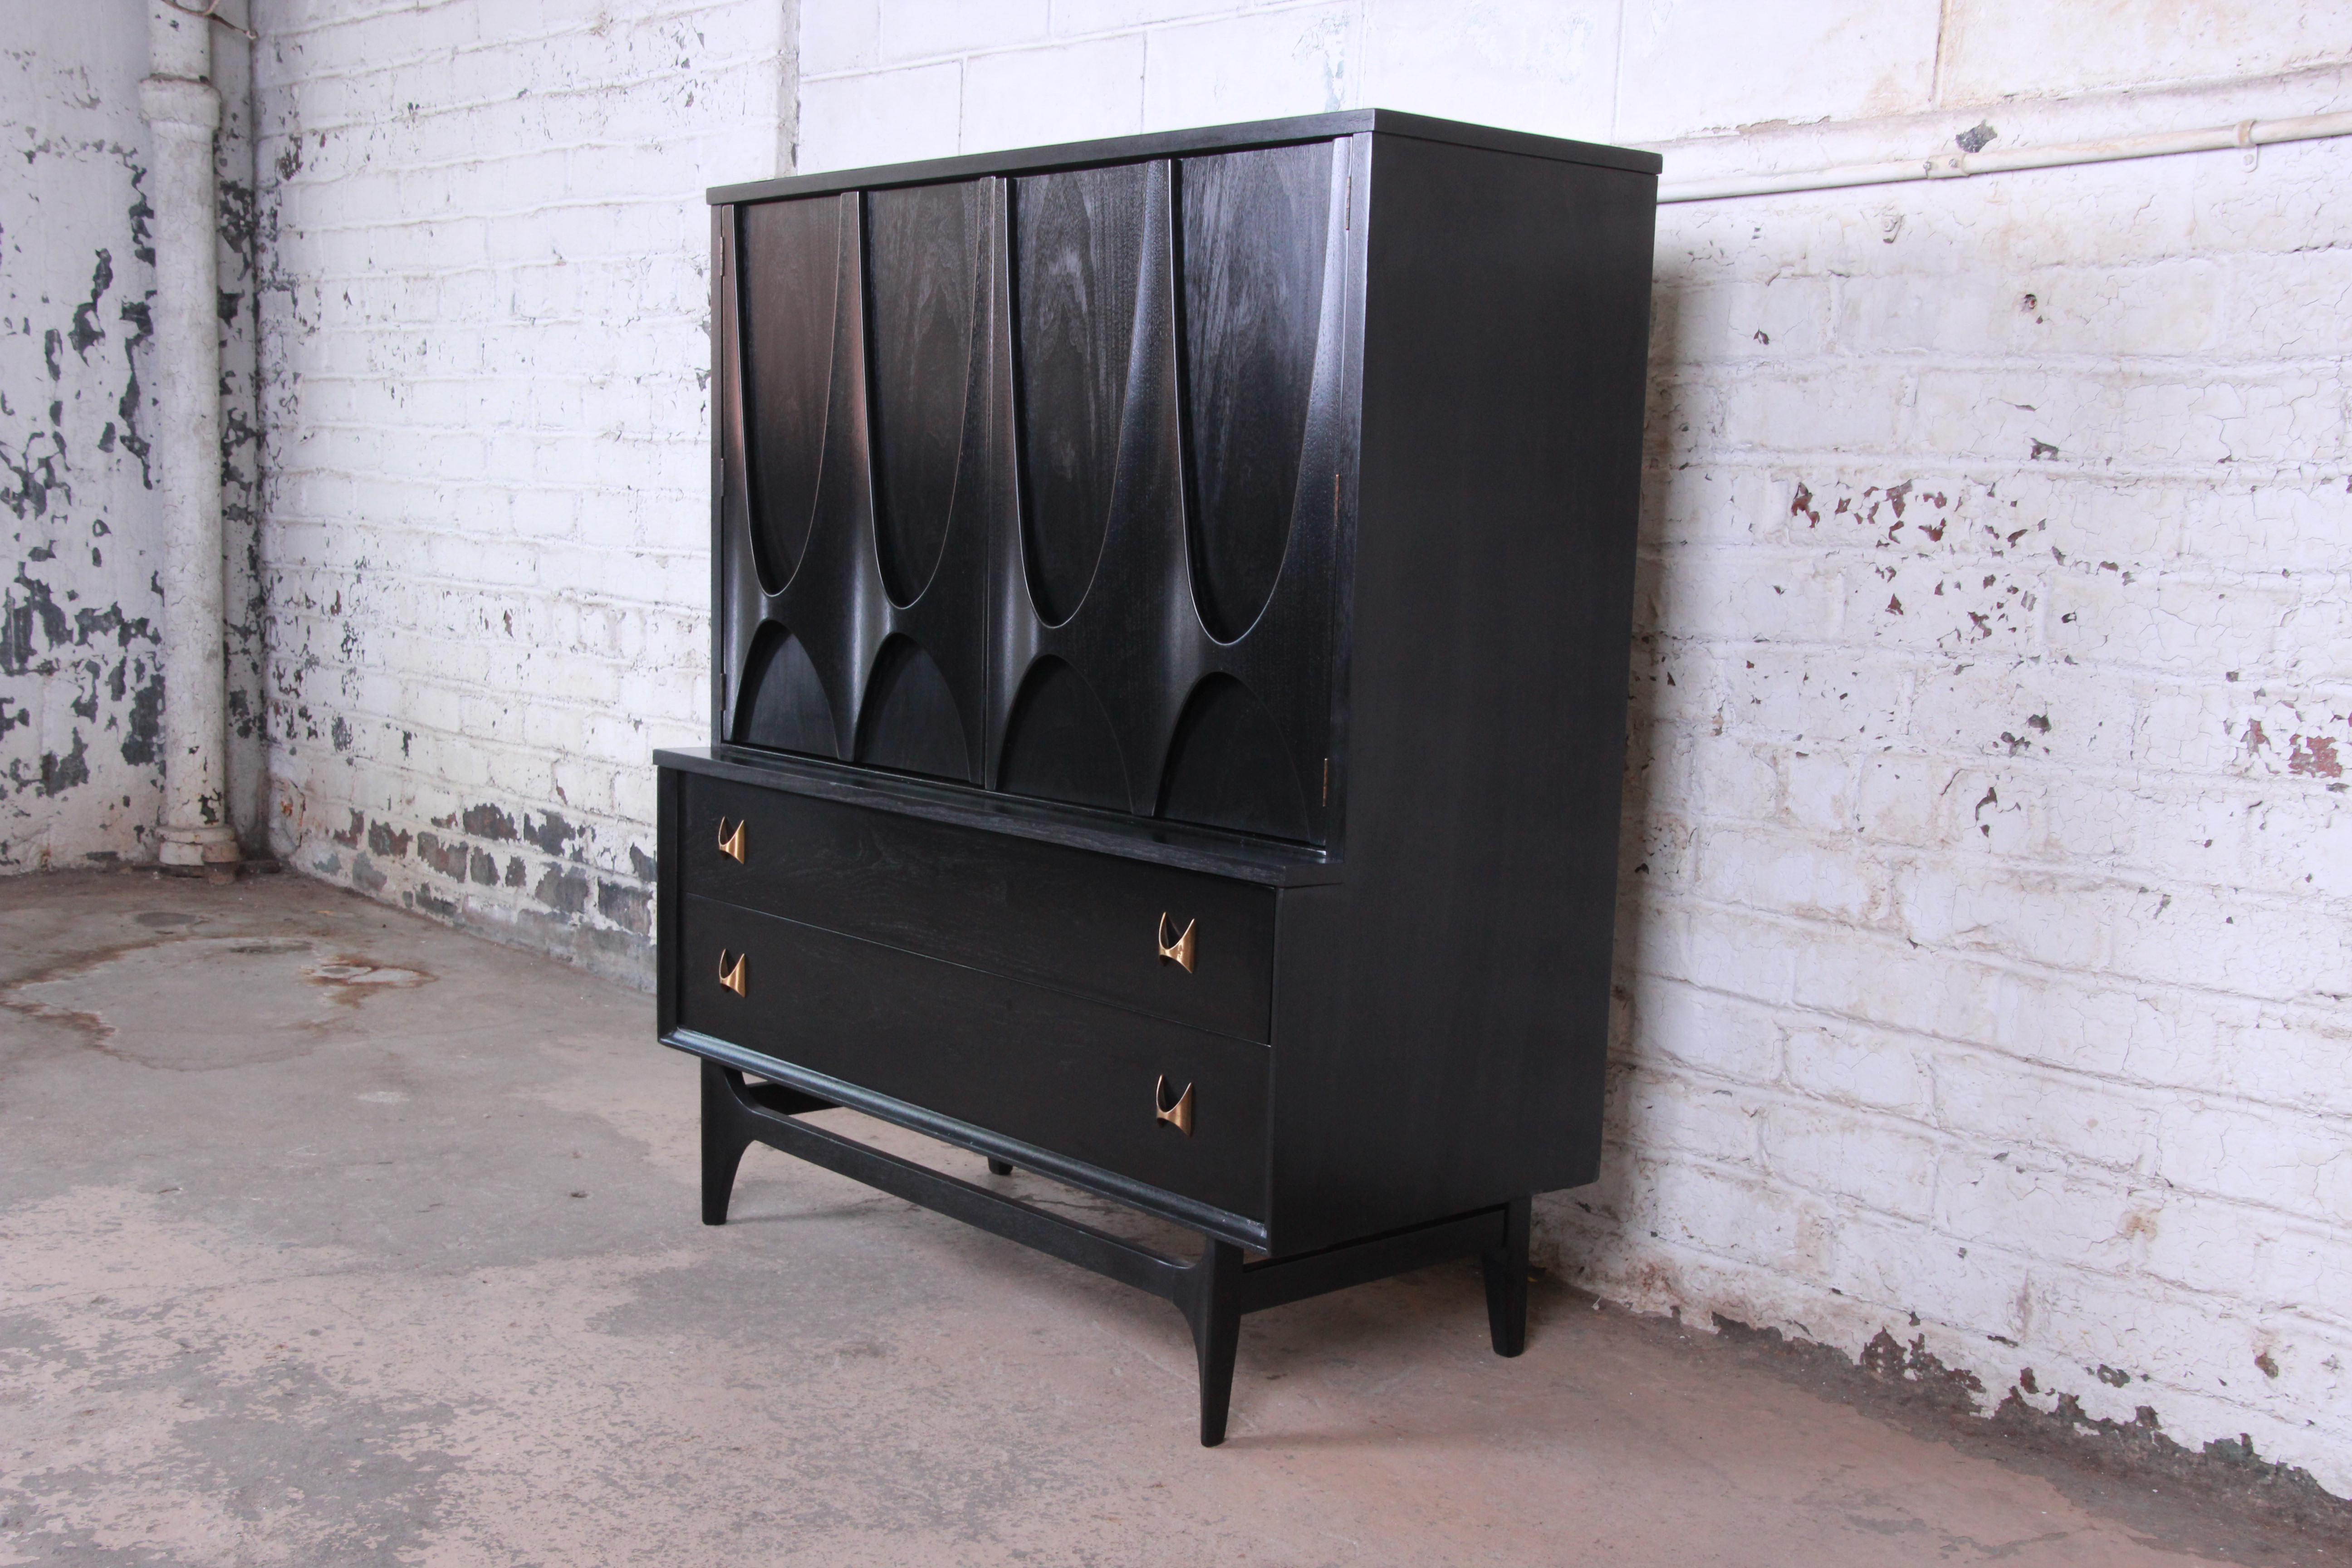 Offering a stunning Mid-Century Modern gentleman's chest or highboy dresser by Broyhill Brasilia. The chest features the iconic sculpted walnut design with newly ebonized finish and original sculpted arch brass pulls. It offers ample room for